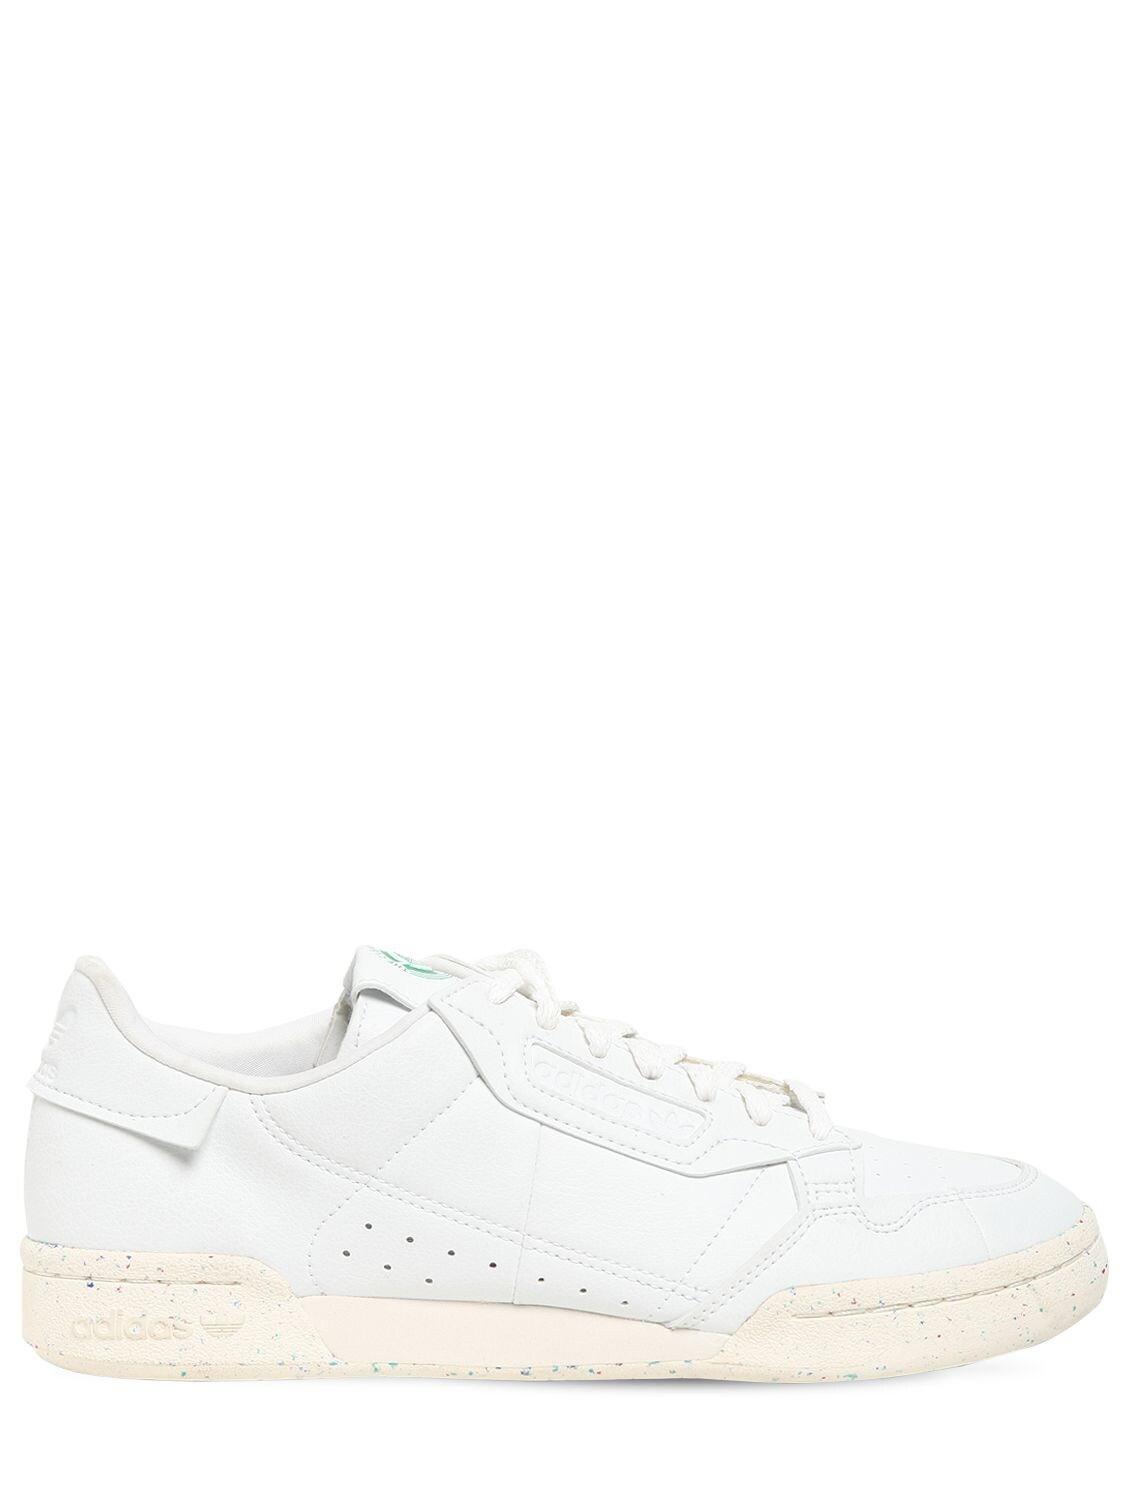 adidas originals continental 80's in white and silver